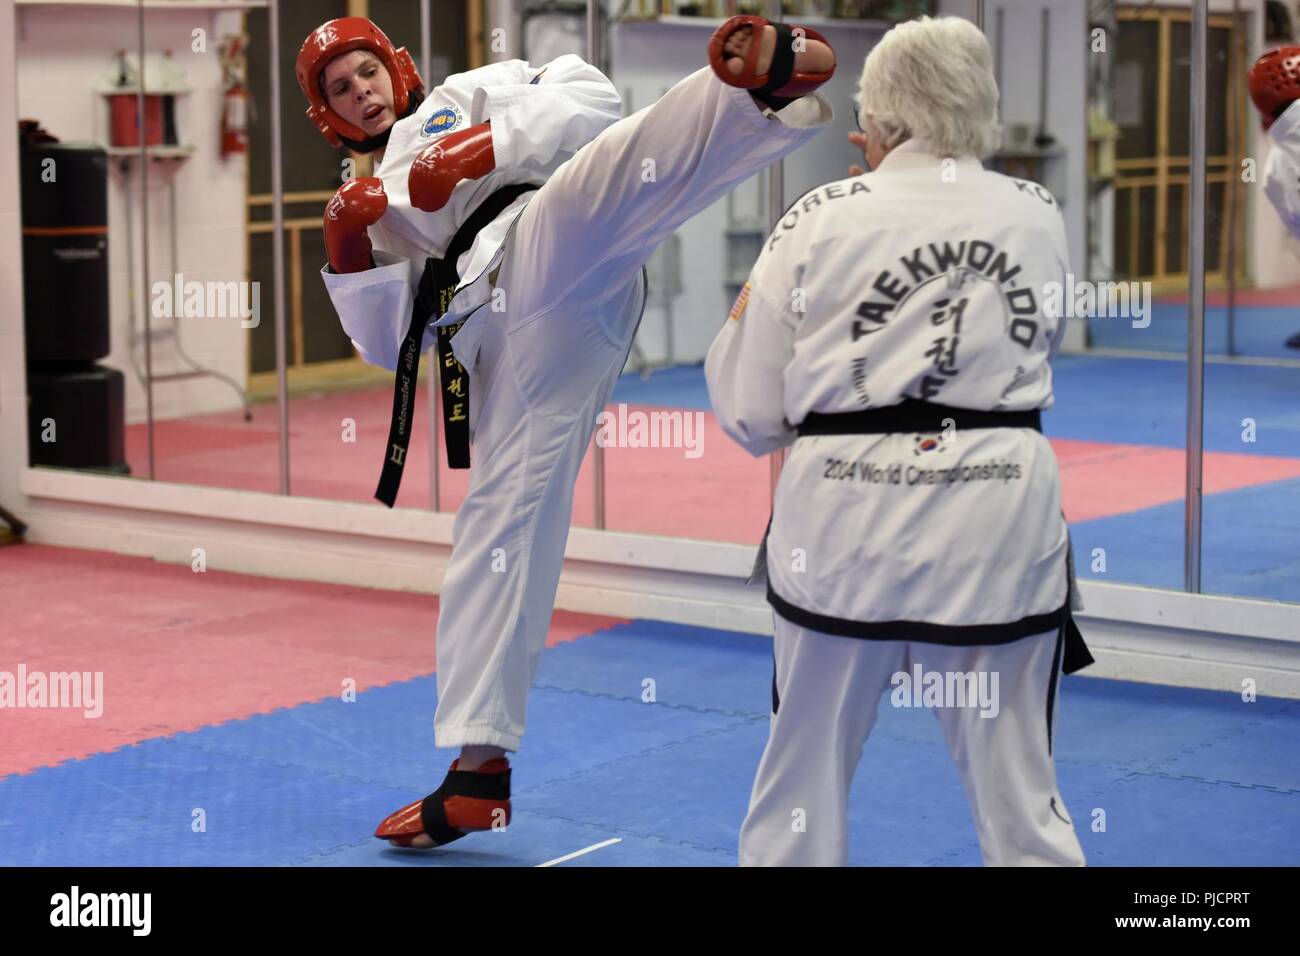 1st Class Lydia Delmonico, an information technology specialist assigned to the 180th Fighter Wing, Ohio Air National Guard, trains for the International Taekwondo Federation World Championships by sparring against her instructor at Great Lakes Global Taekwondo in Sylvania, Ohio, July 11,2018. The ITF World Championships take place from July 31through Aug. 5 in Buenos Aires, Argentina. Stock Photo